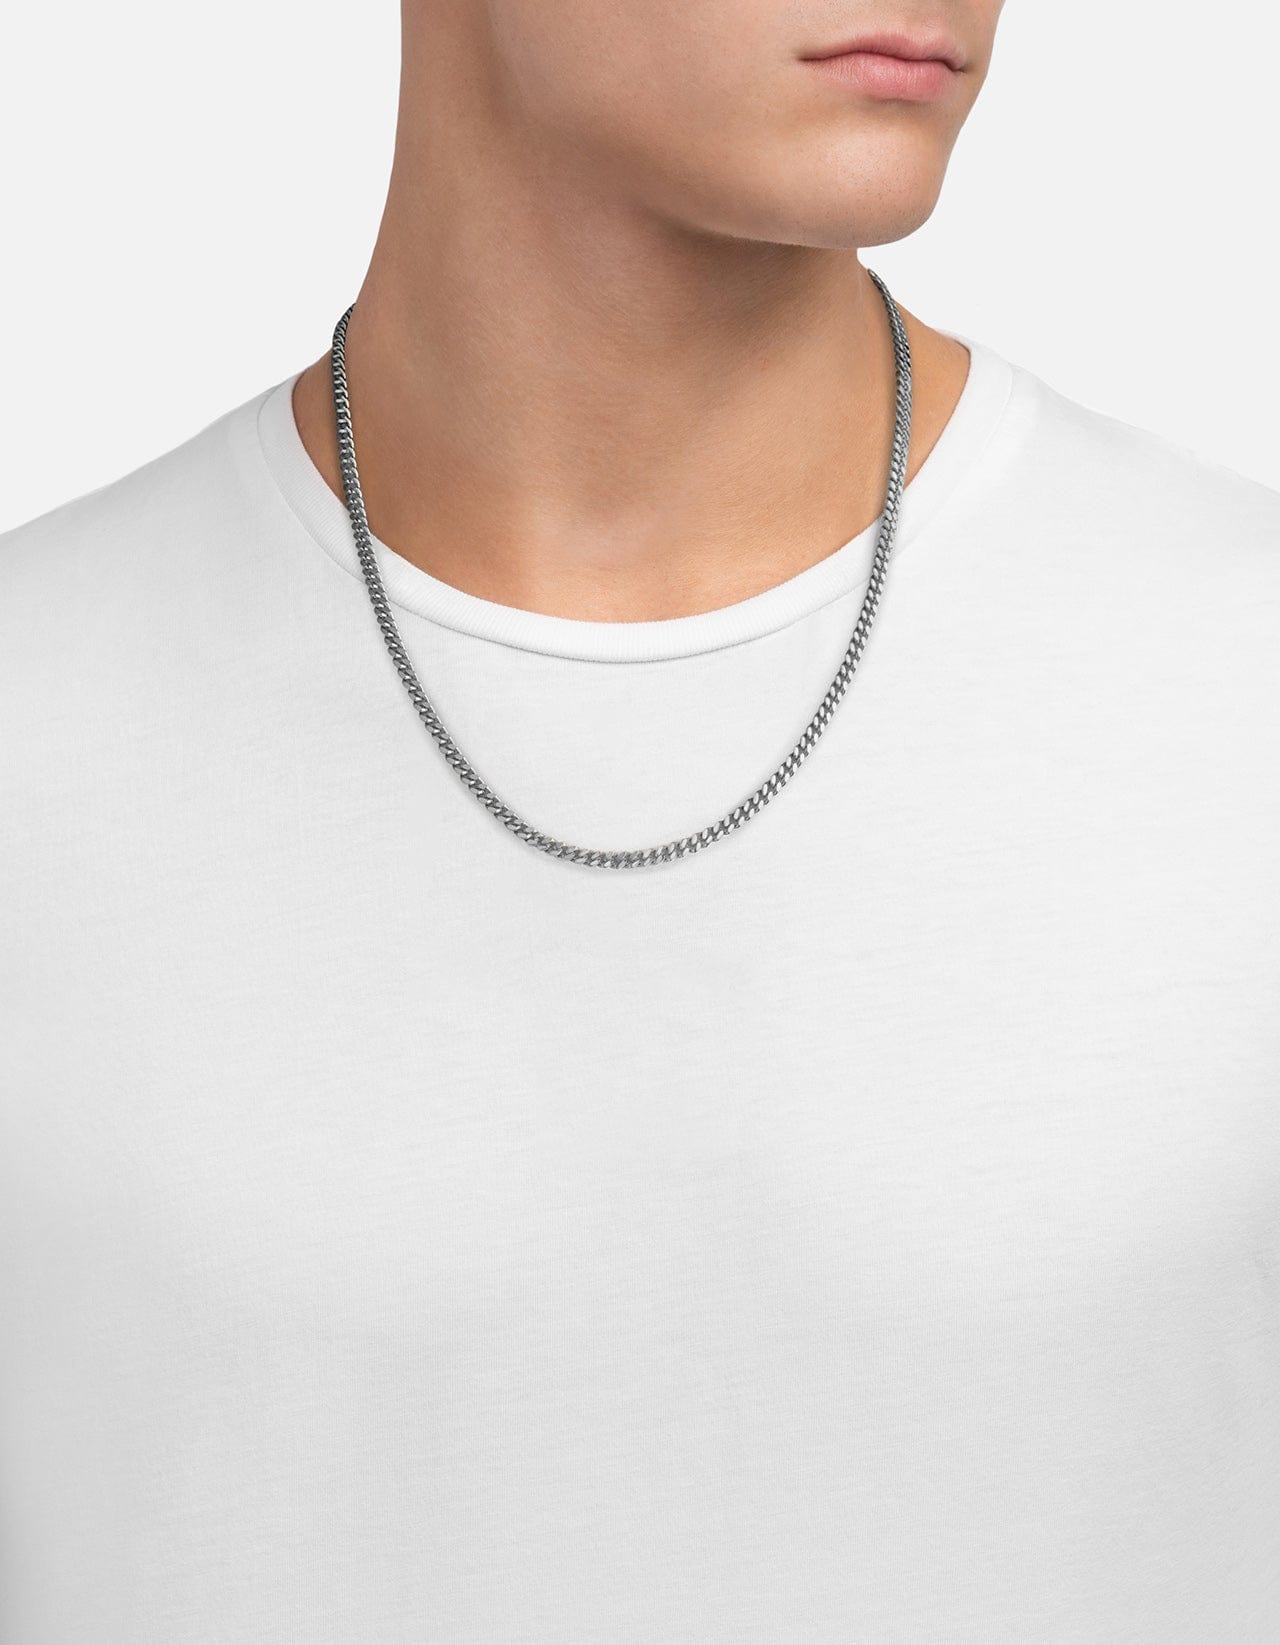 4mm Sterling Silver Cuban Chain Necklace, Men's Necklaces